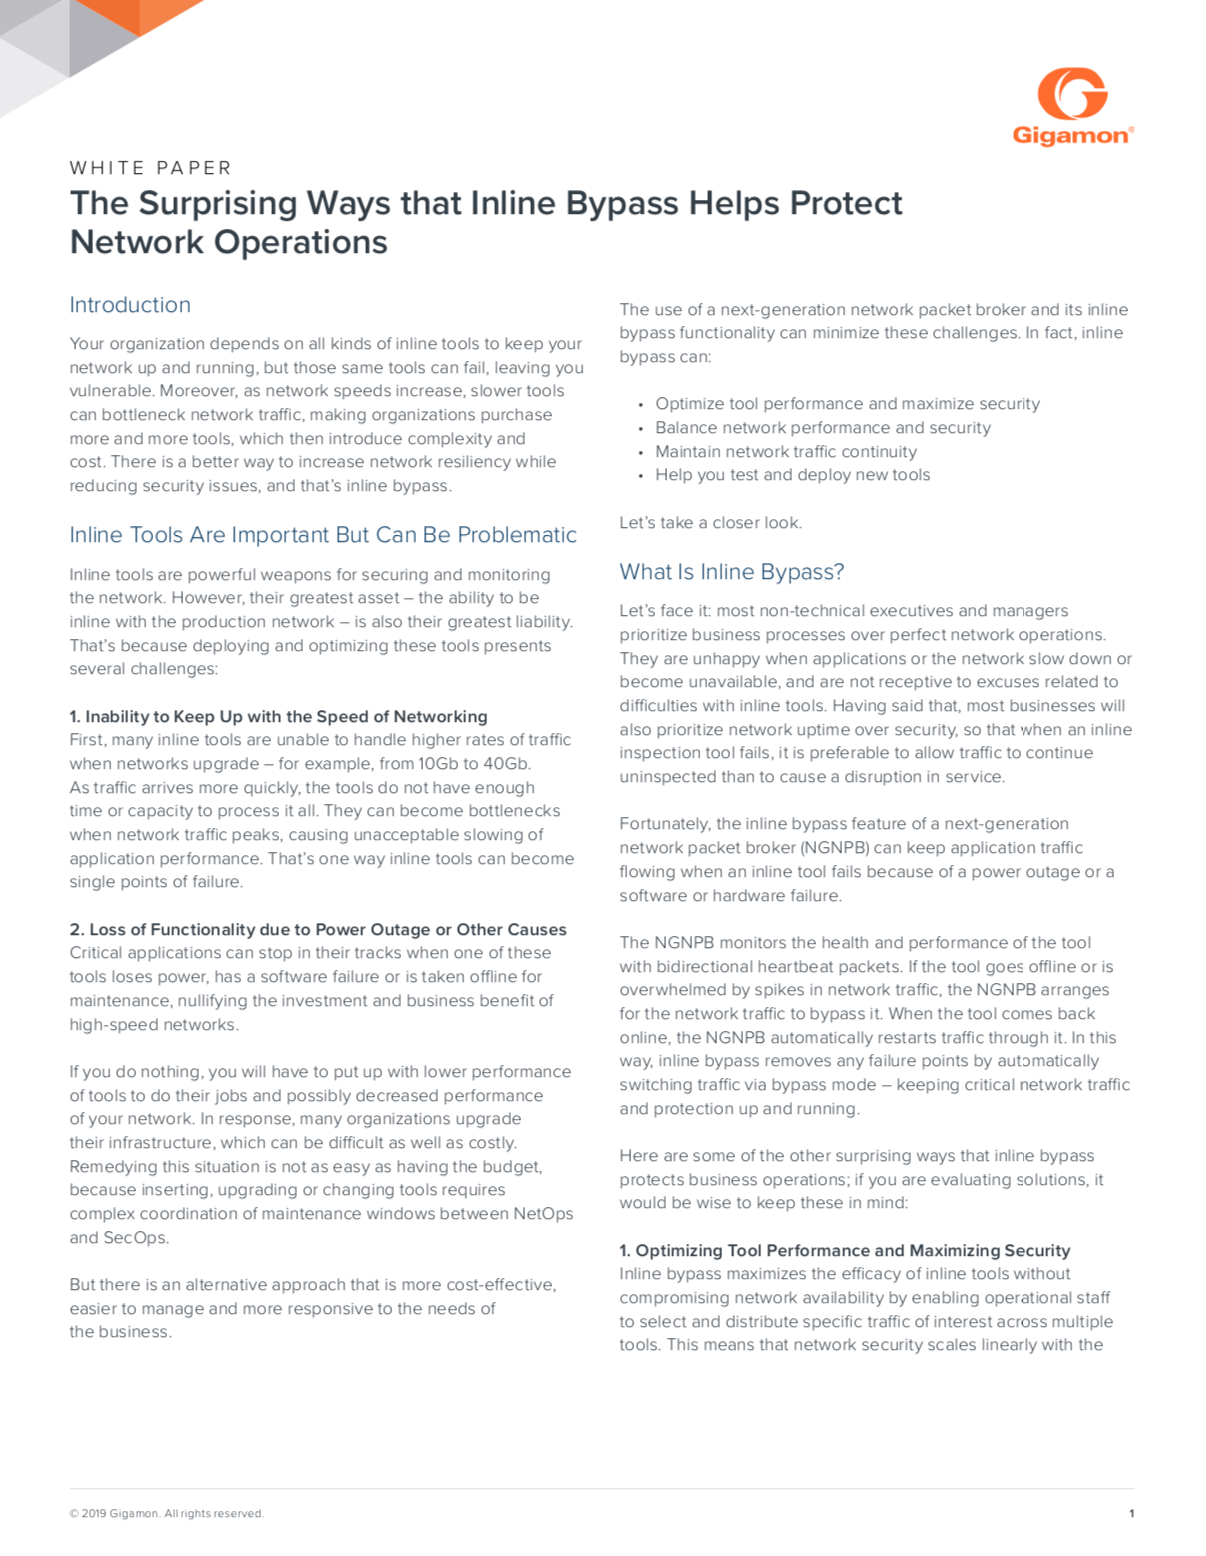 The Surprising Ways that Inline Bypass Helps Protect Network Operations